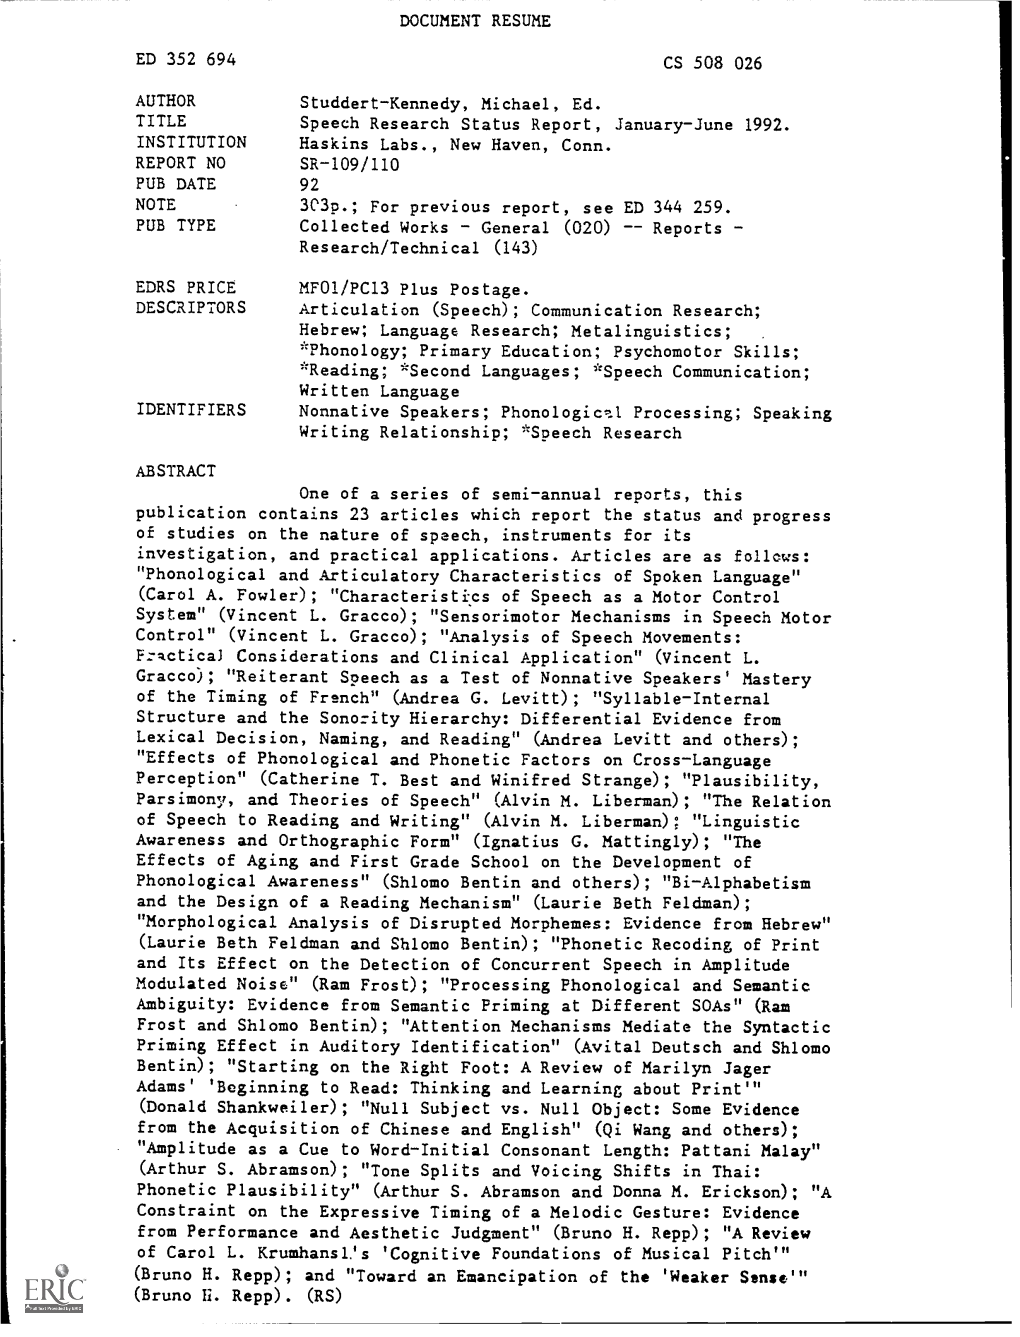 Speech Research Status Report, January-June 1992. INSTITUTION Haskins Labs., New Haven, Conn